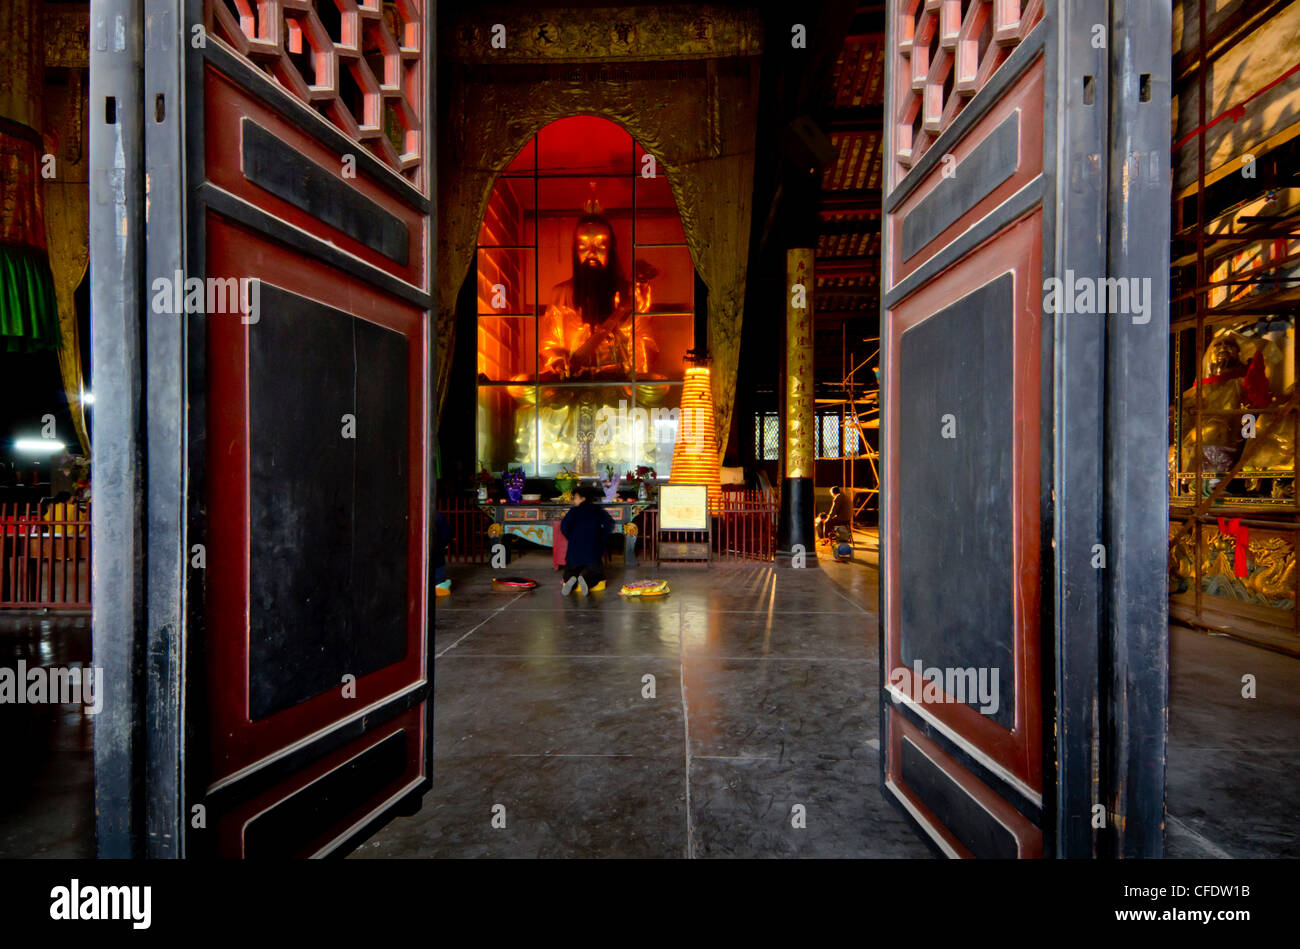 Qingyang Gong monastery temple complex, Chengdu, Sichuan, China, Asia Stock Photo